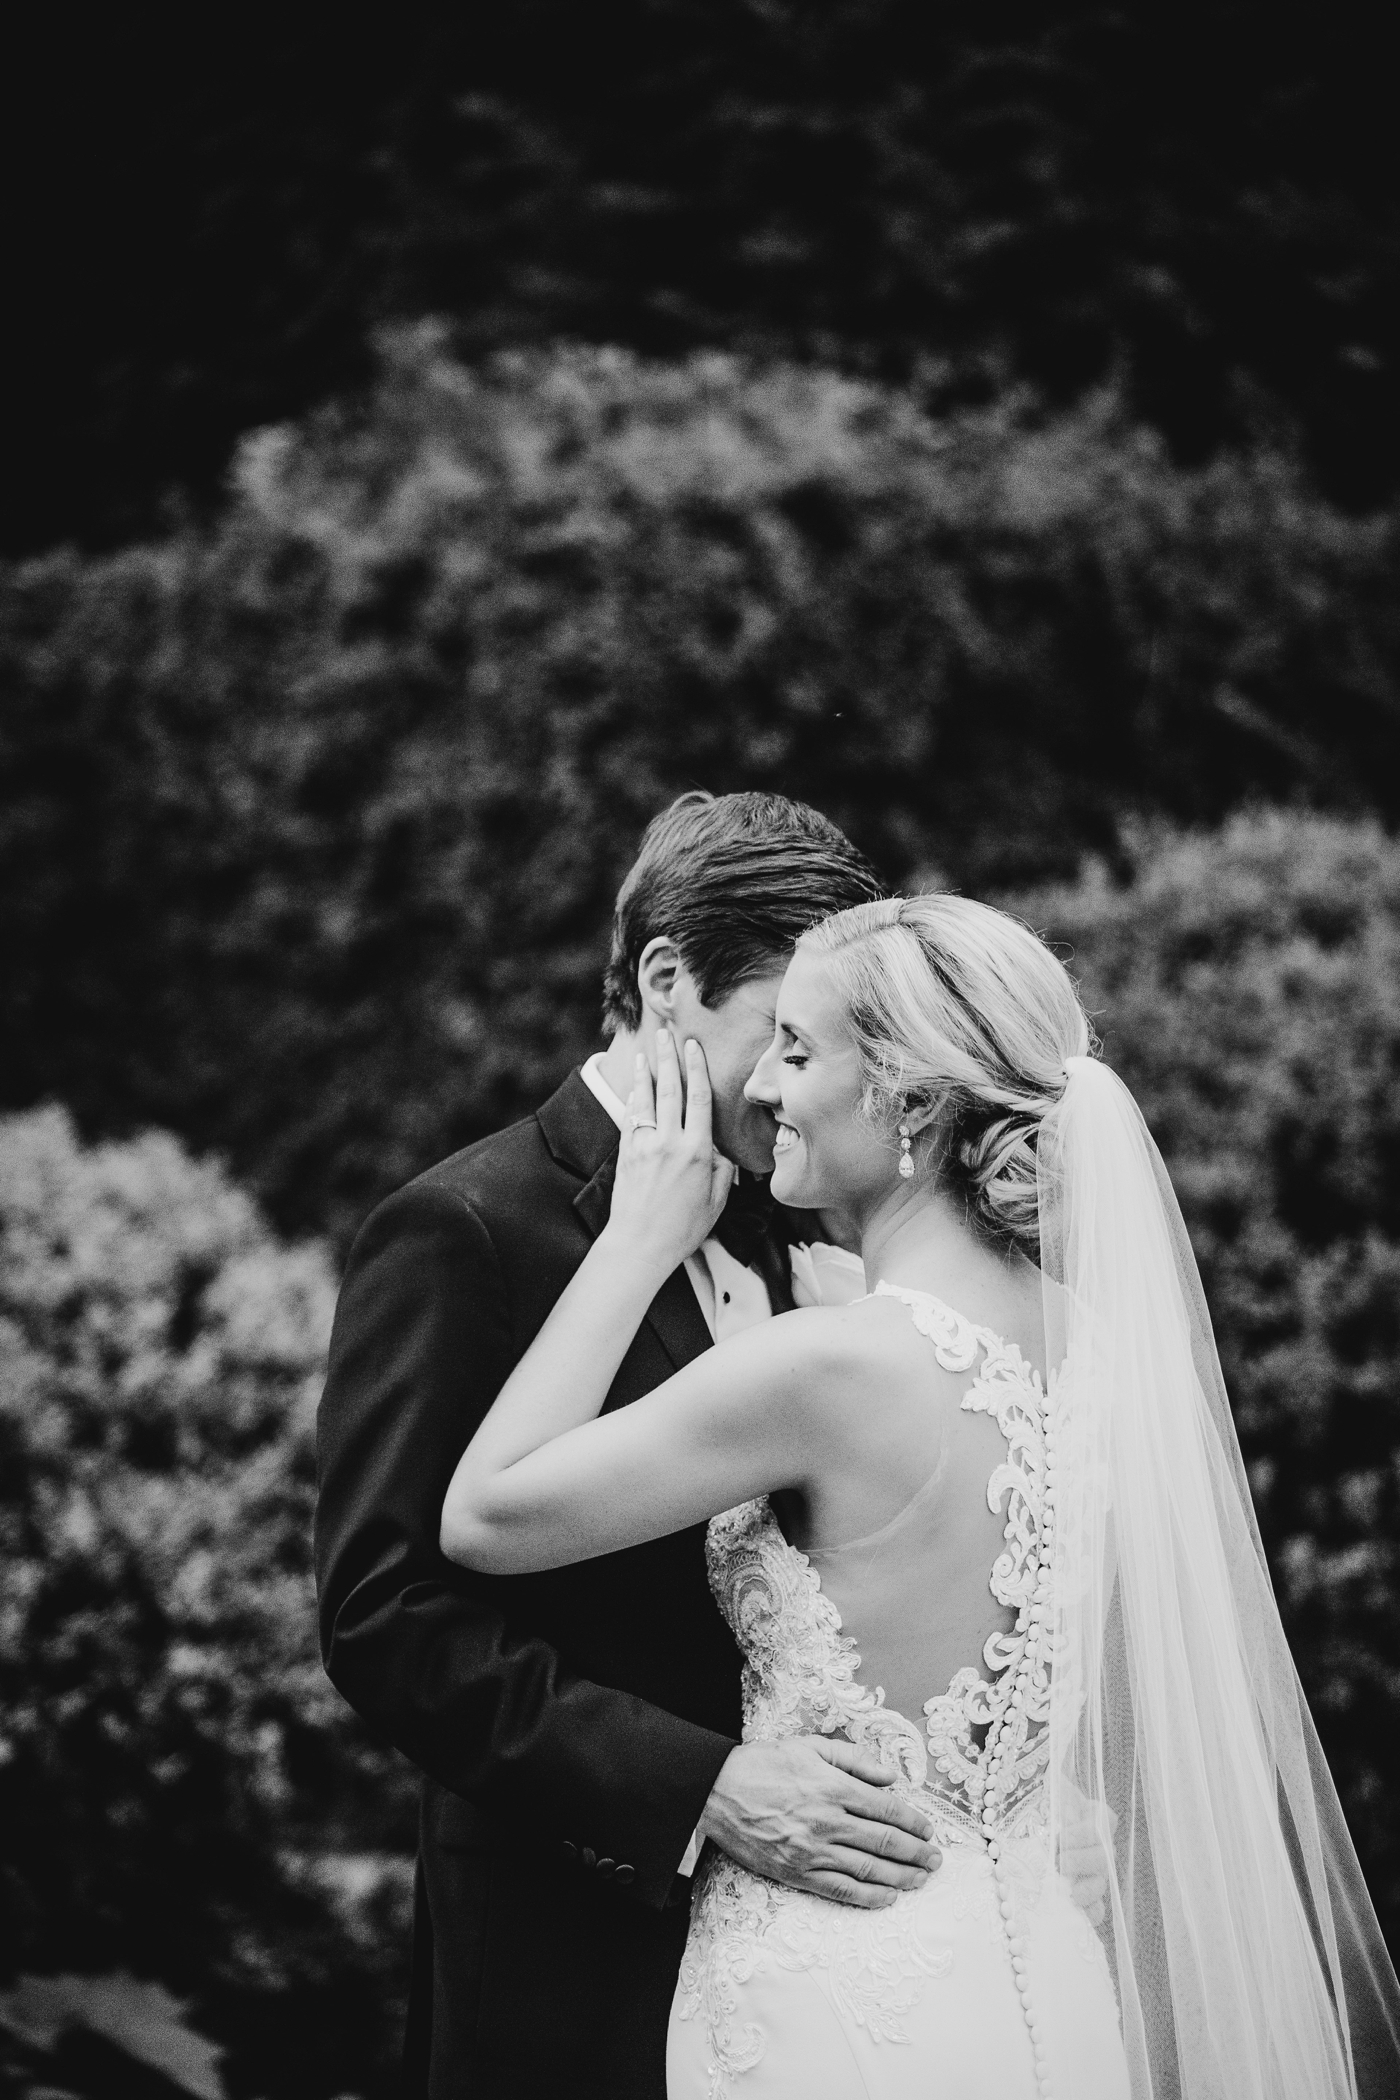 Spring wedding at The Foundry at Graduate Athens | Athens Wedding Photographer Izzy and Co.